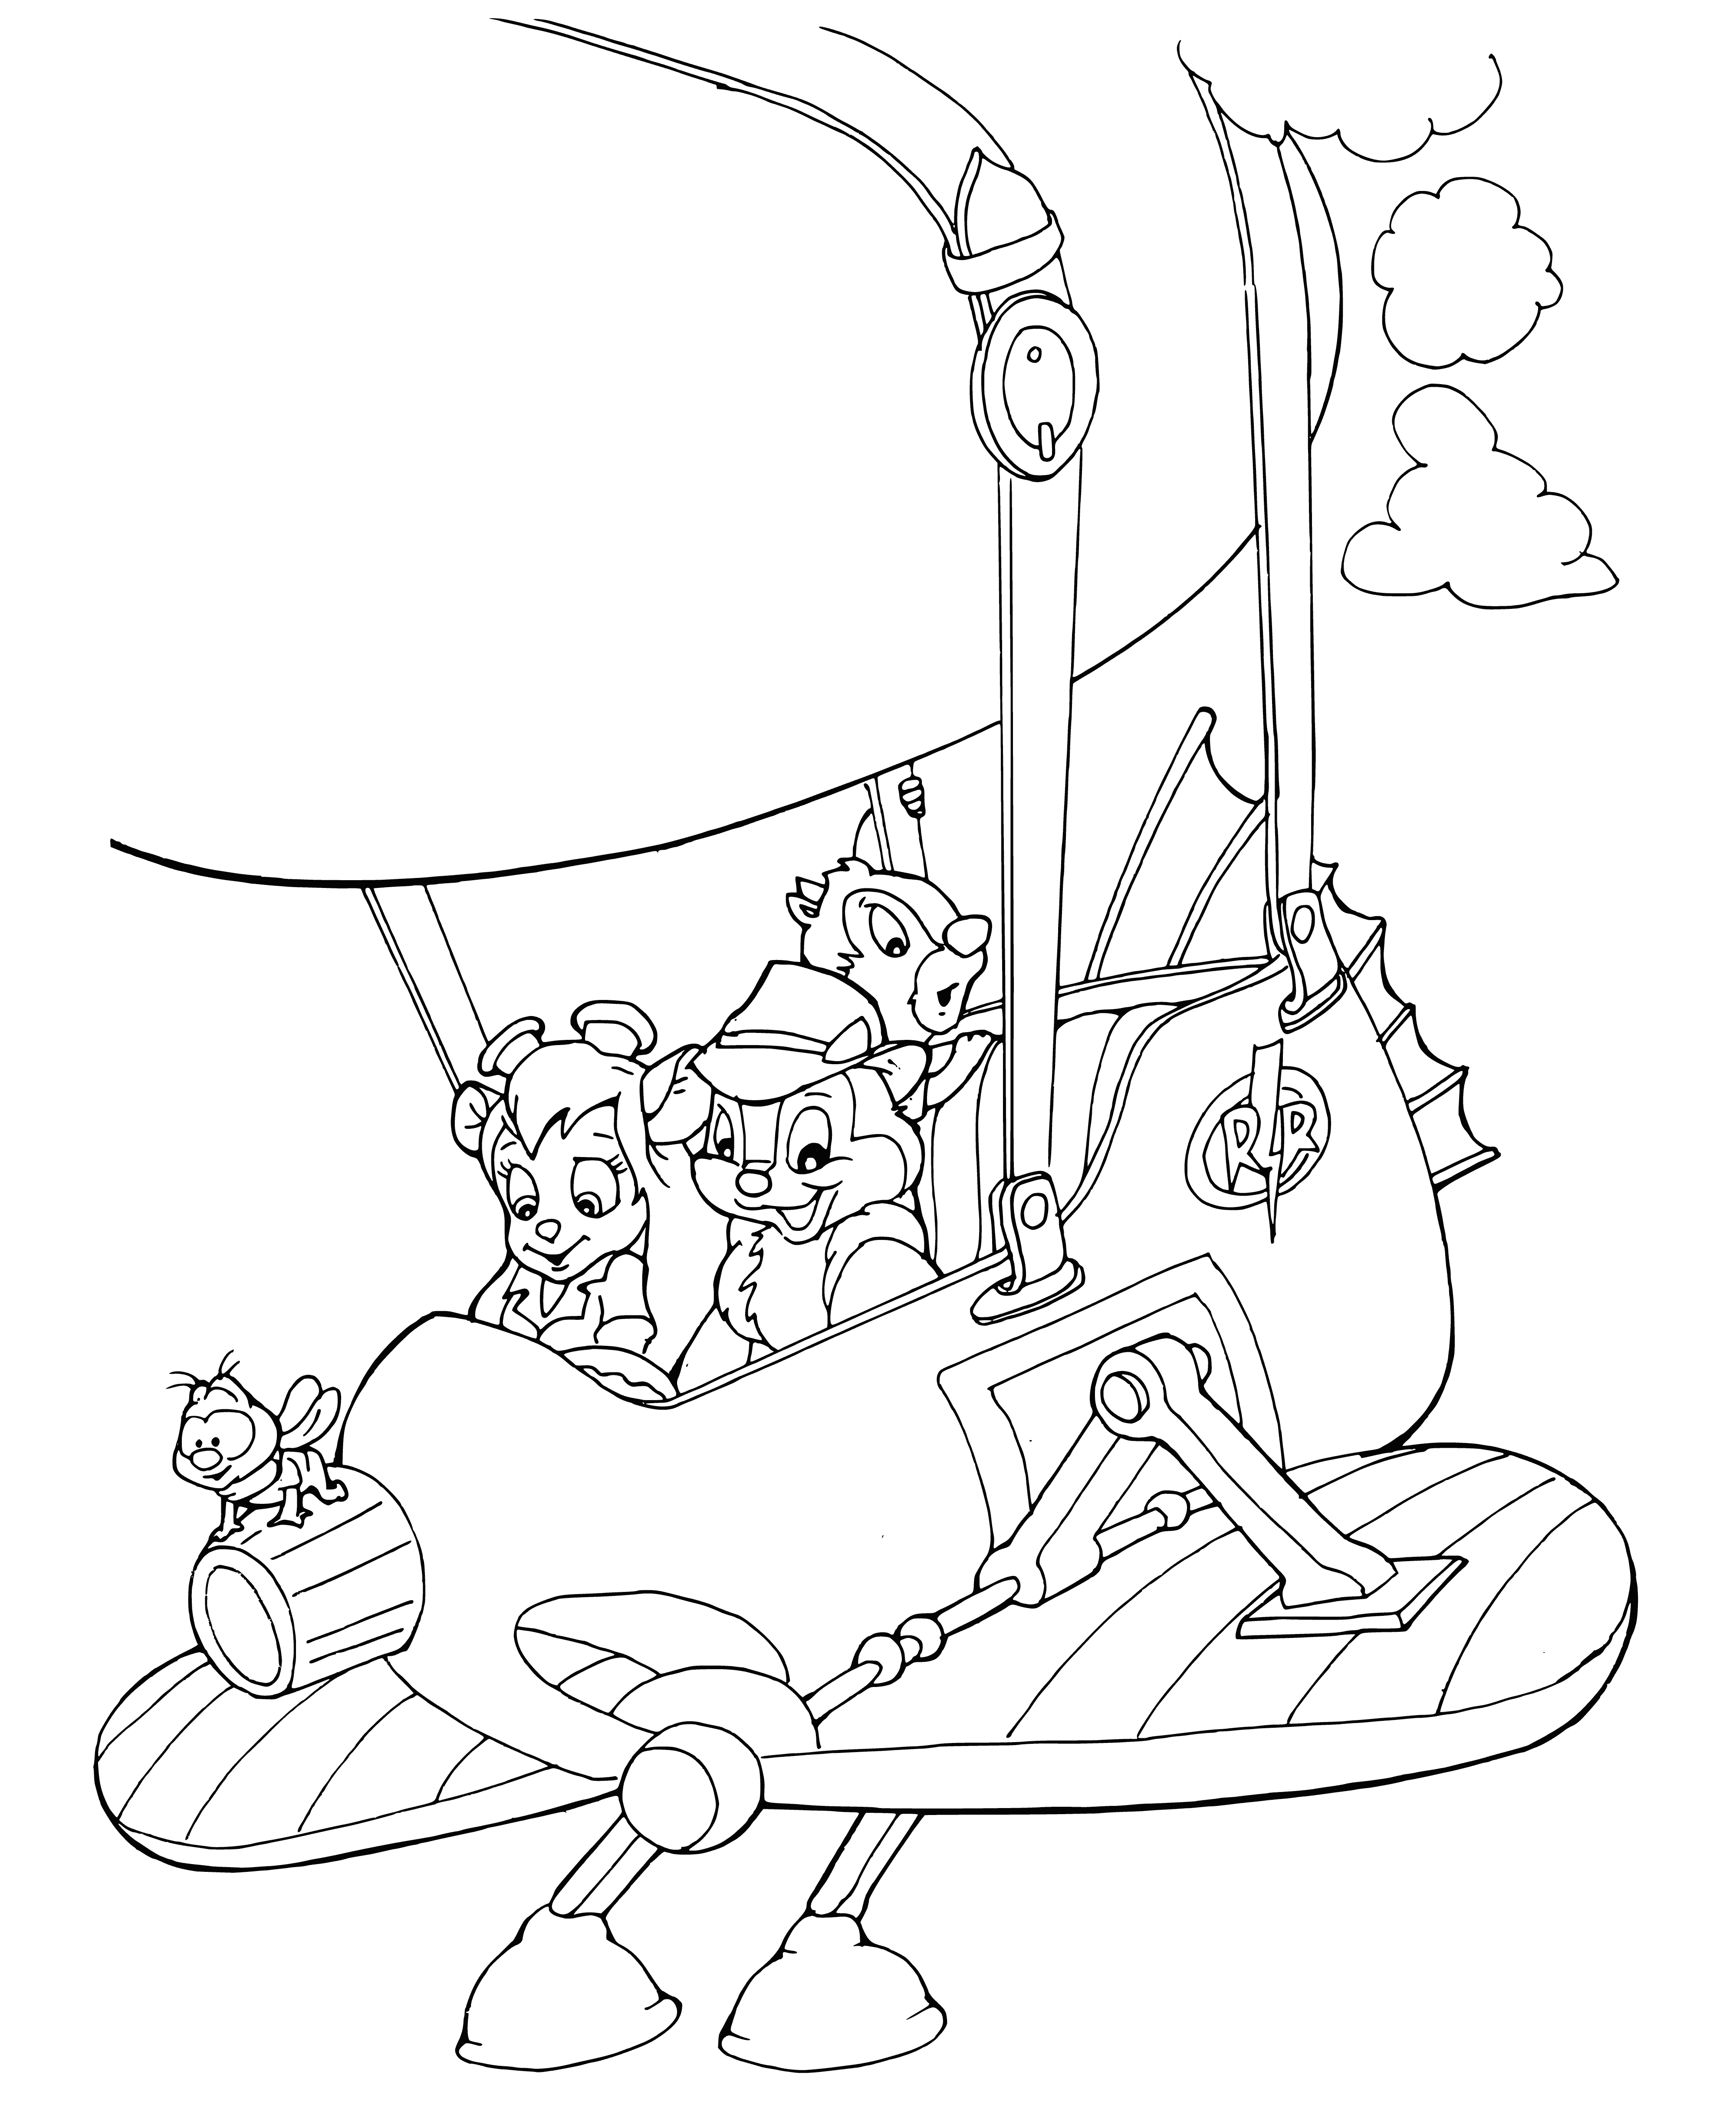 coloring page: Quirky yellow plane w/ orange wings, green tail & checkered flag; piloted by brown & tan figure; comes with grappling hooks. #ChipAndDaleRescueRangers